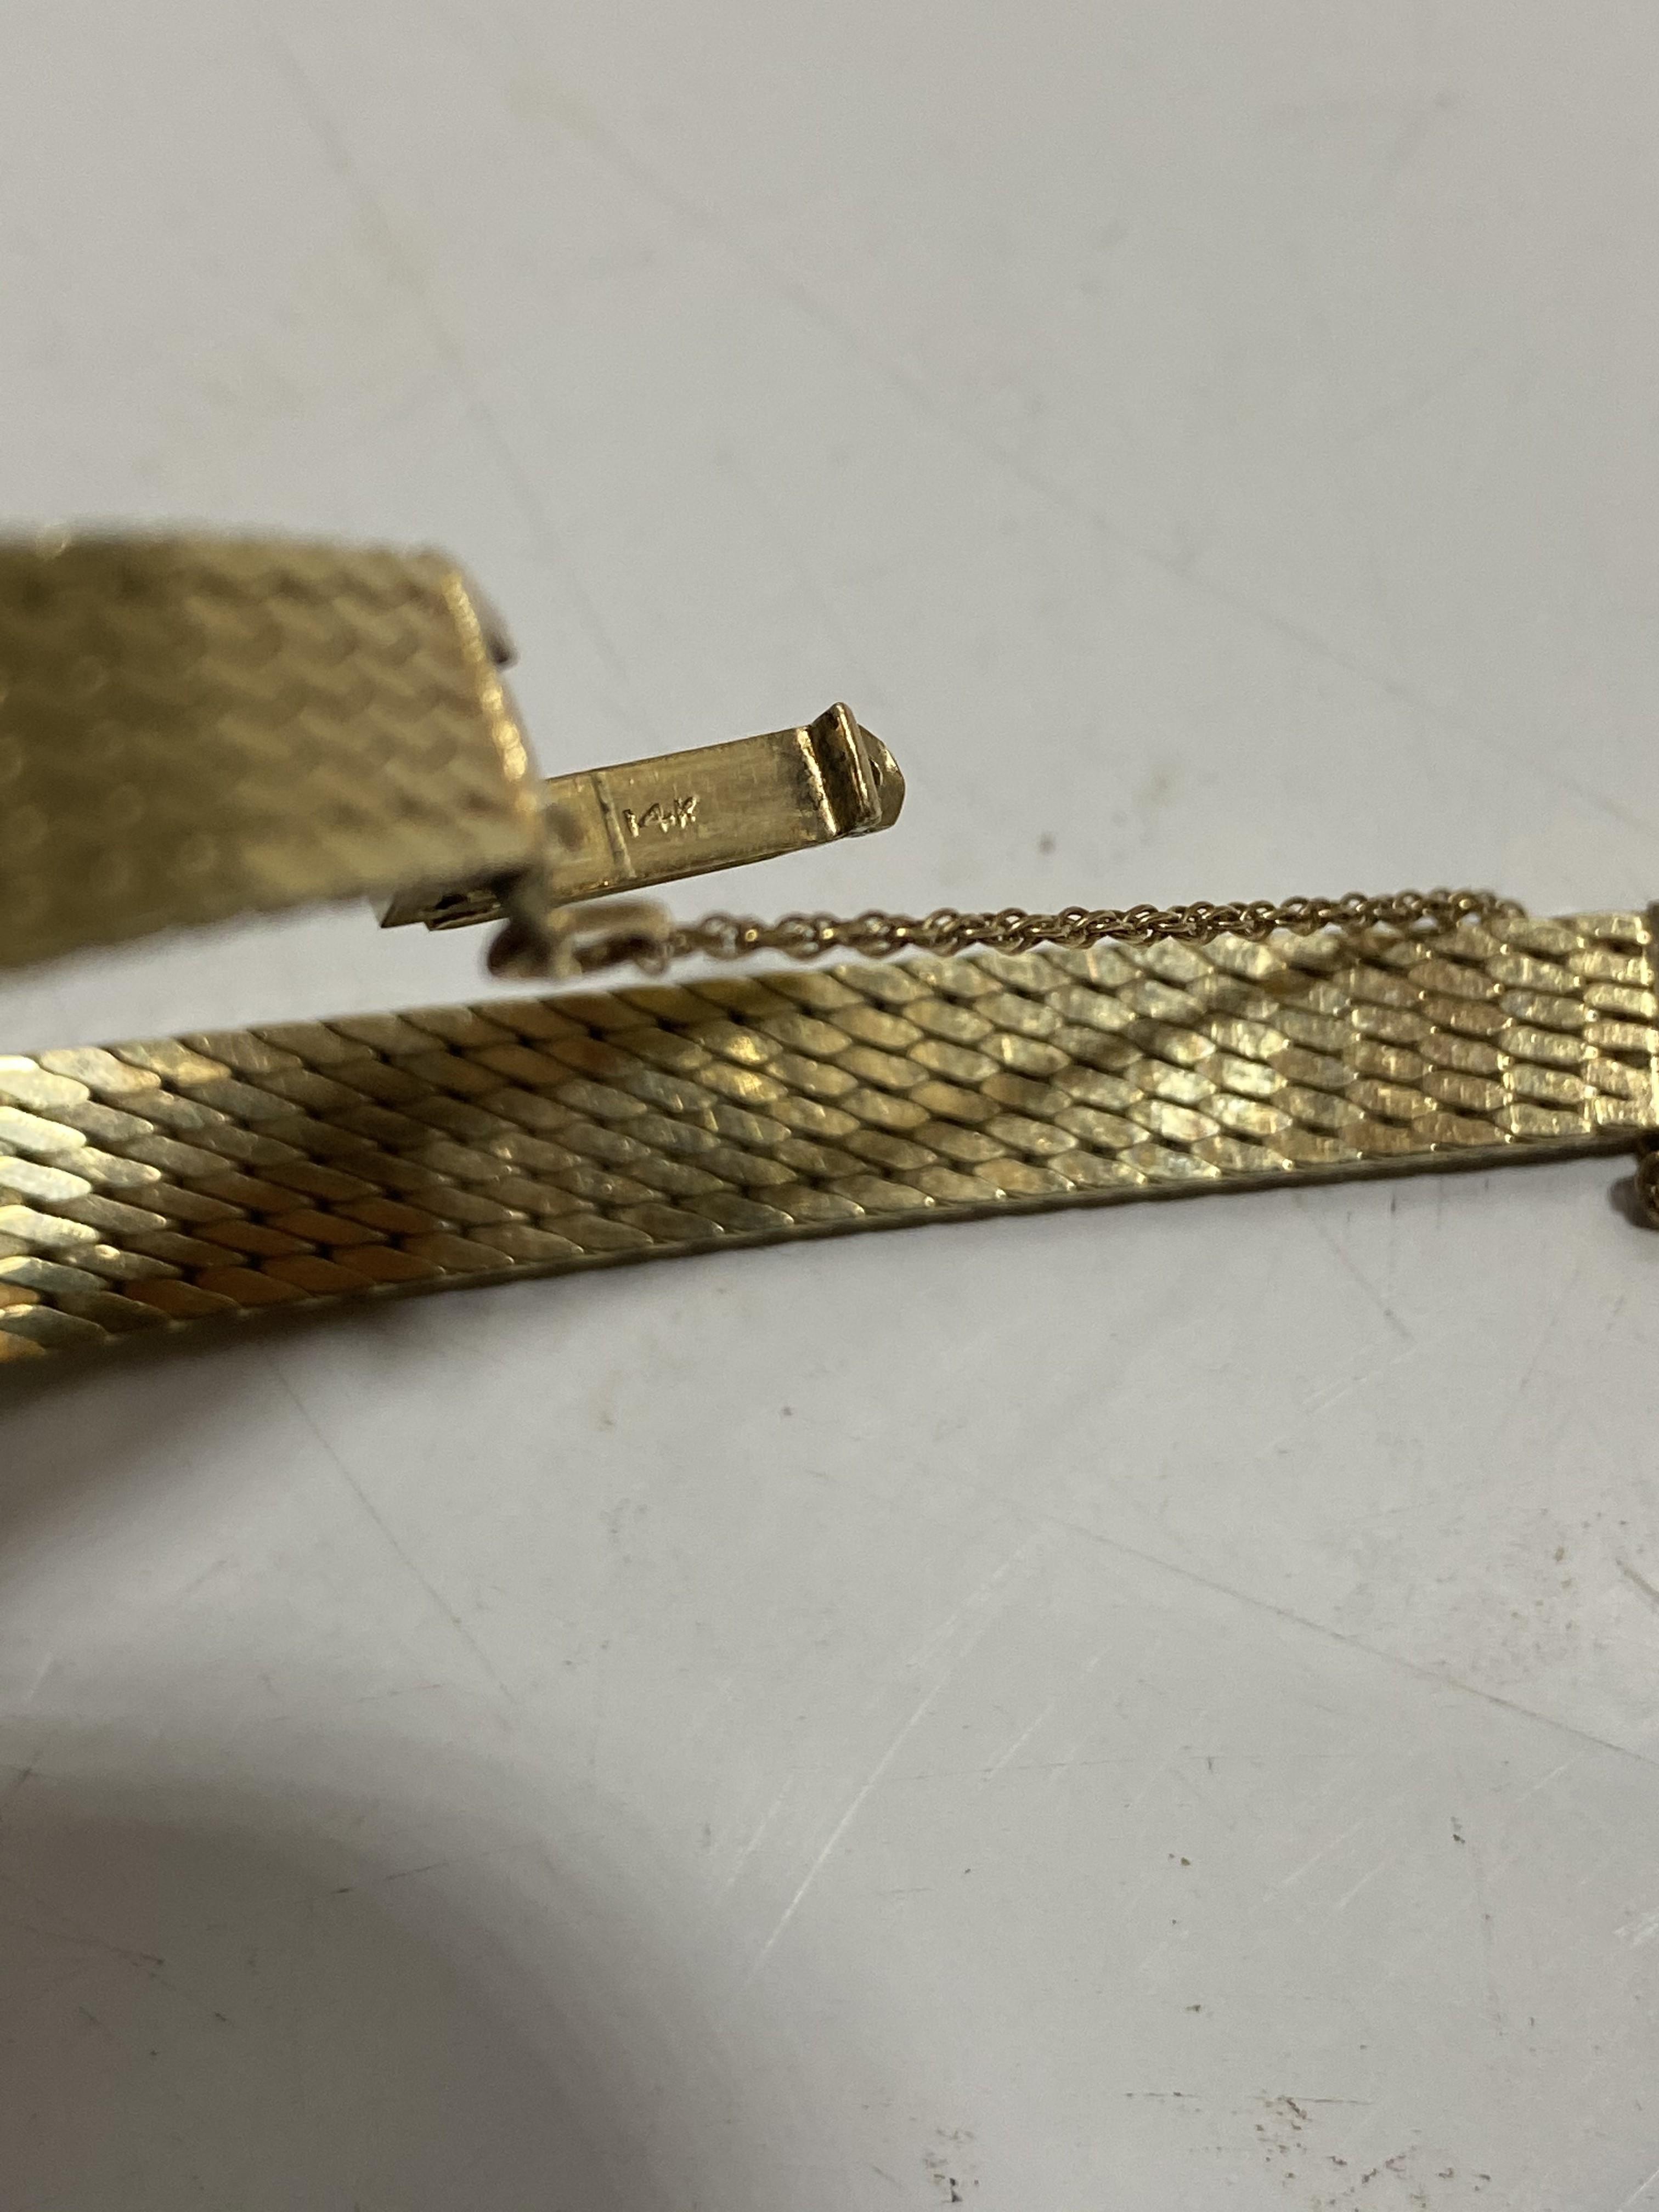 2 14k gold lady's watches heavy 14k gold bands